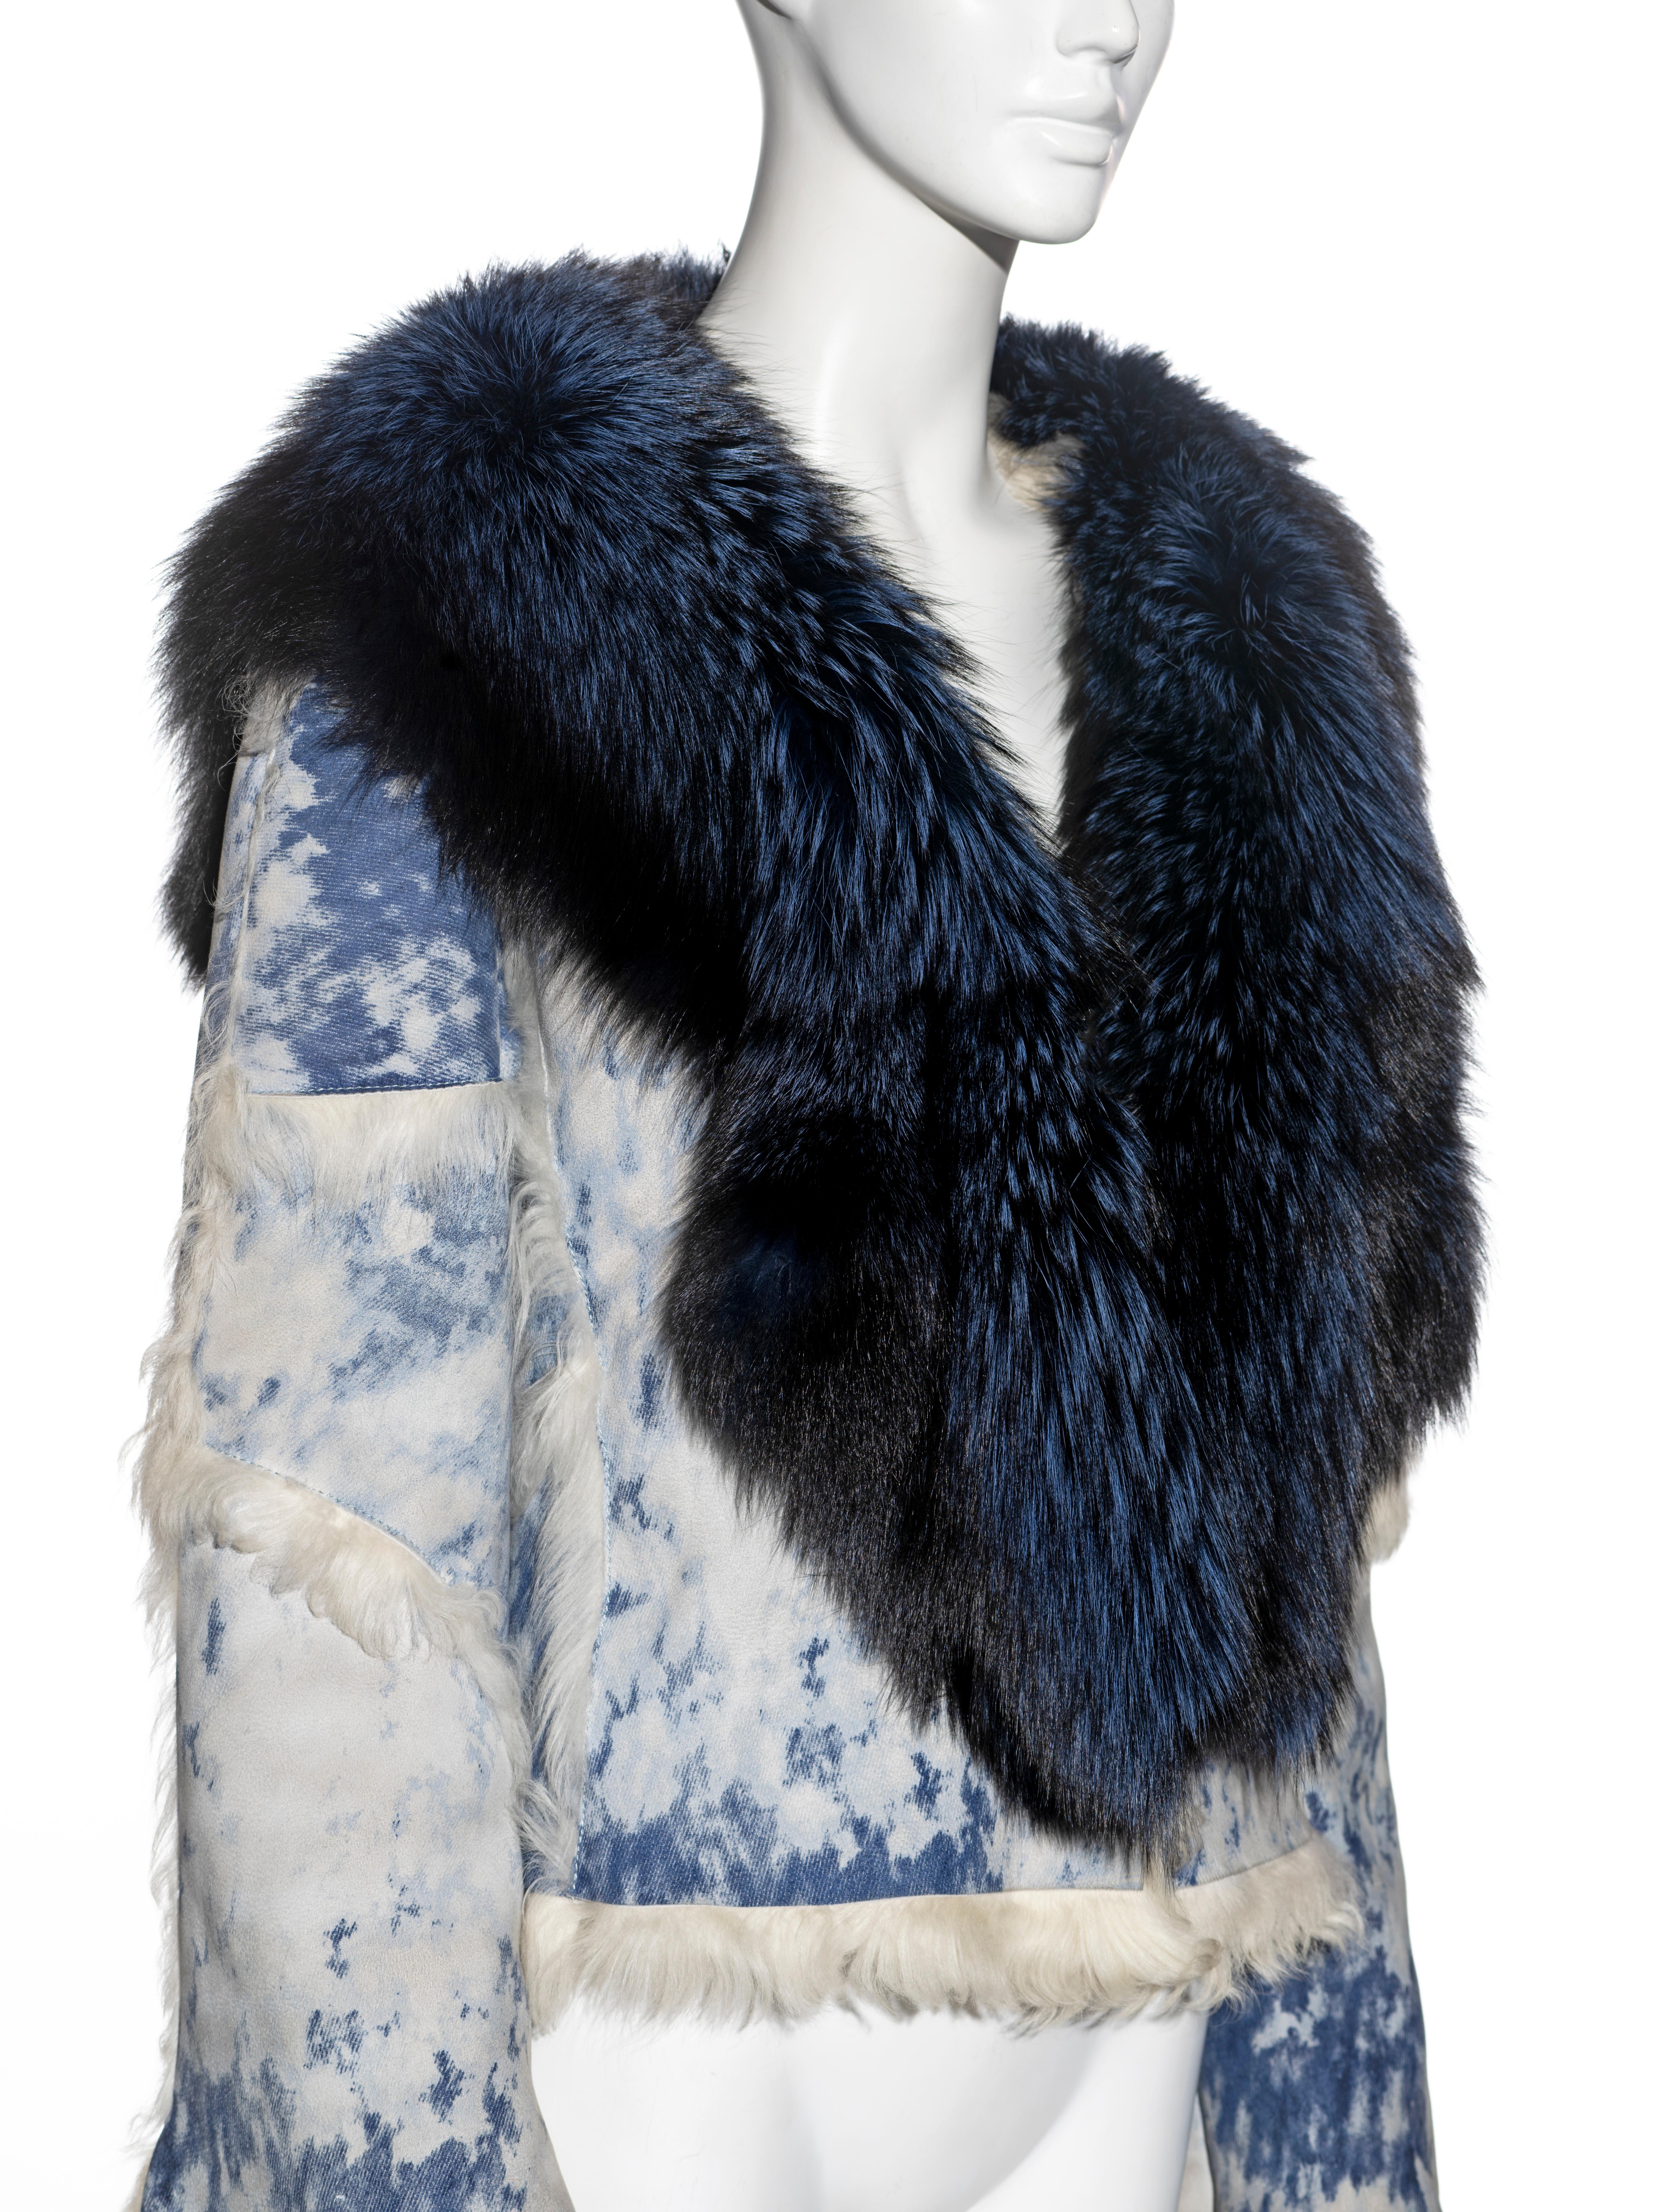 ▪ Roberto Cavalli jacket 
▪ Sold by One of a Kind Archive
▪ Constructed from leather with a bleached denim print 
▪ Large blue fox fur collar 
▪ White fur lining and trim 
▪ Size: Medium 
▪ Fall-Winter 2001
▪ Made in Italy

All photographs in this